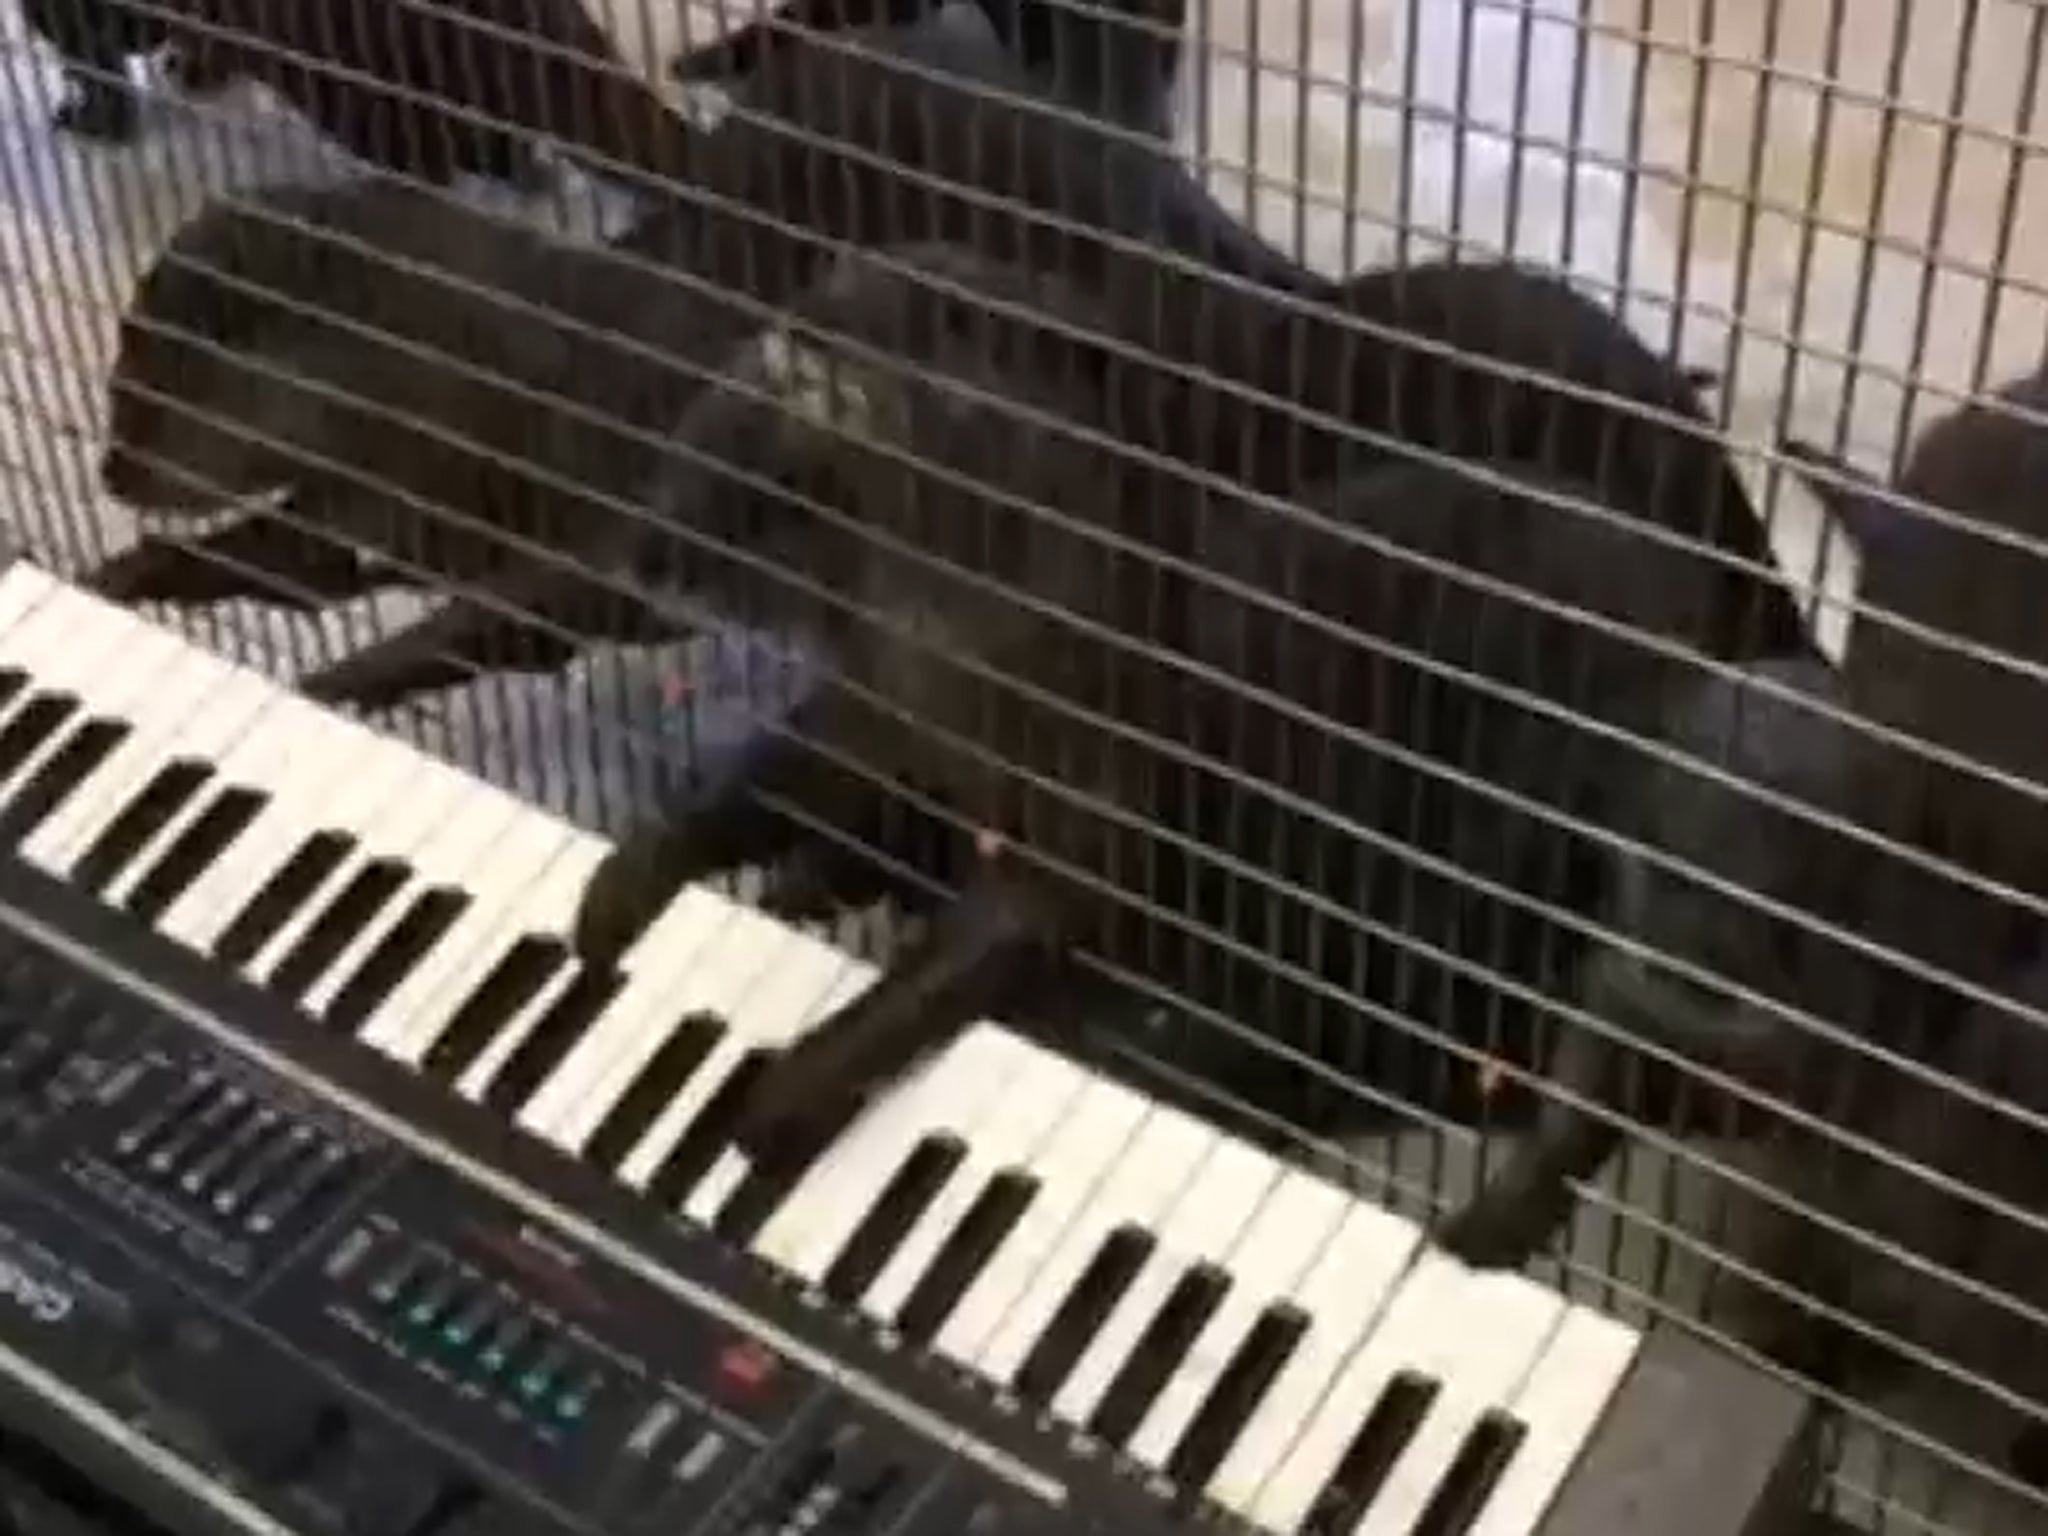 An organutan plays the xylophone and a group of otters have a go on a keyboard at the Smithsonian National Zoo in Washington, D.C.